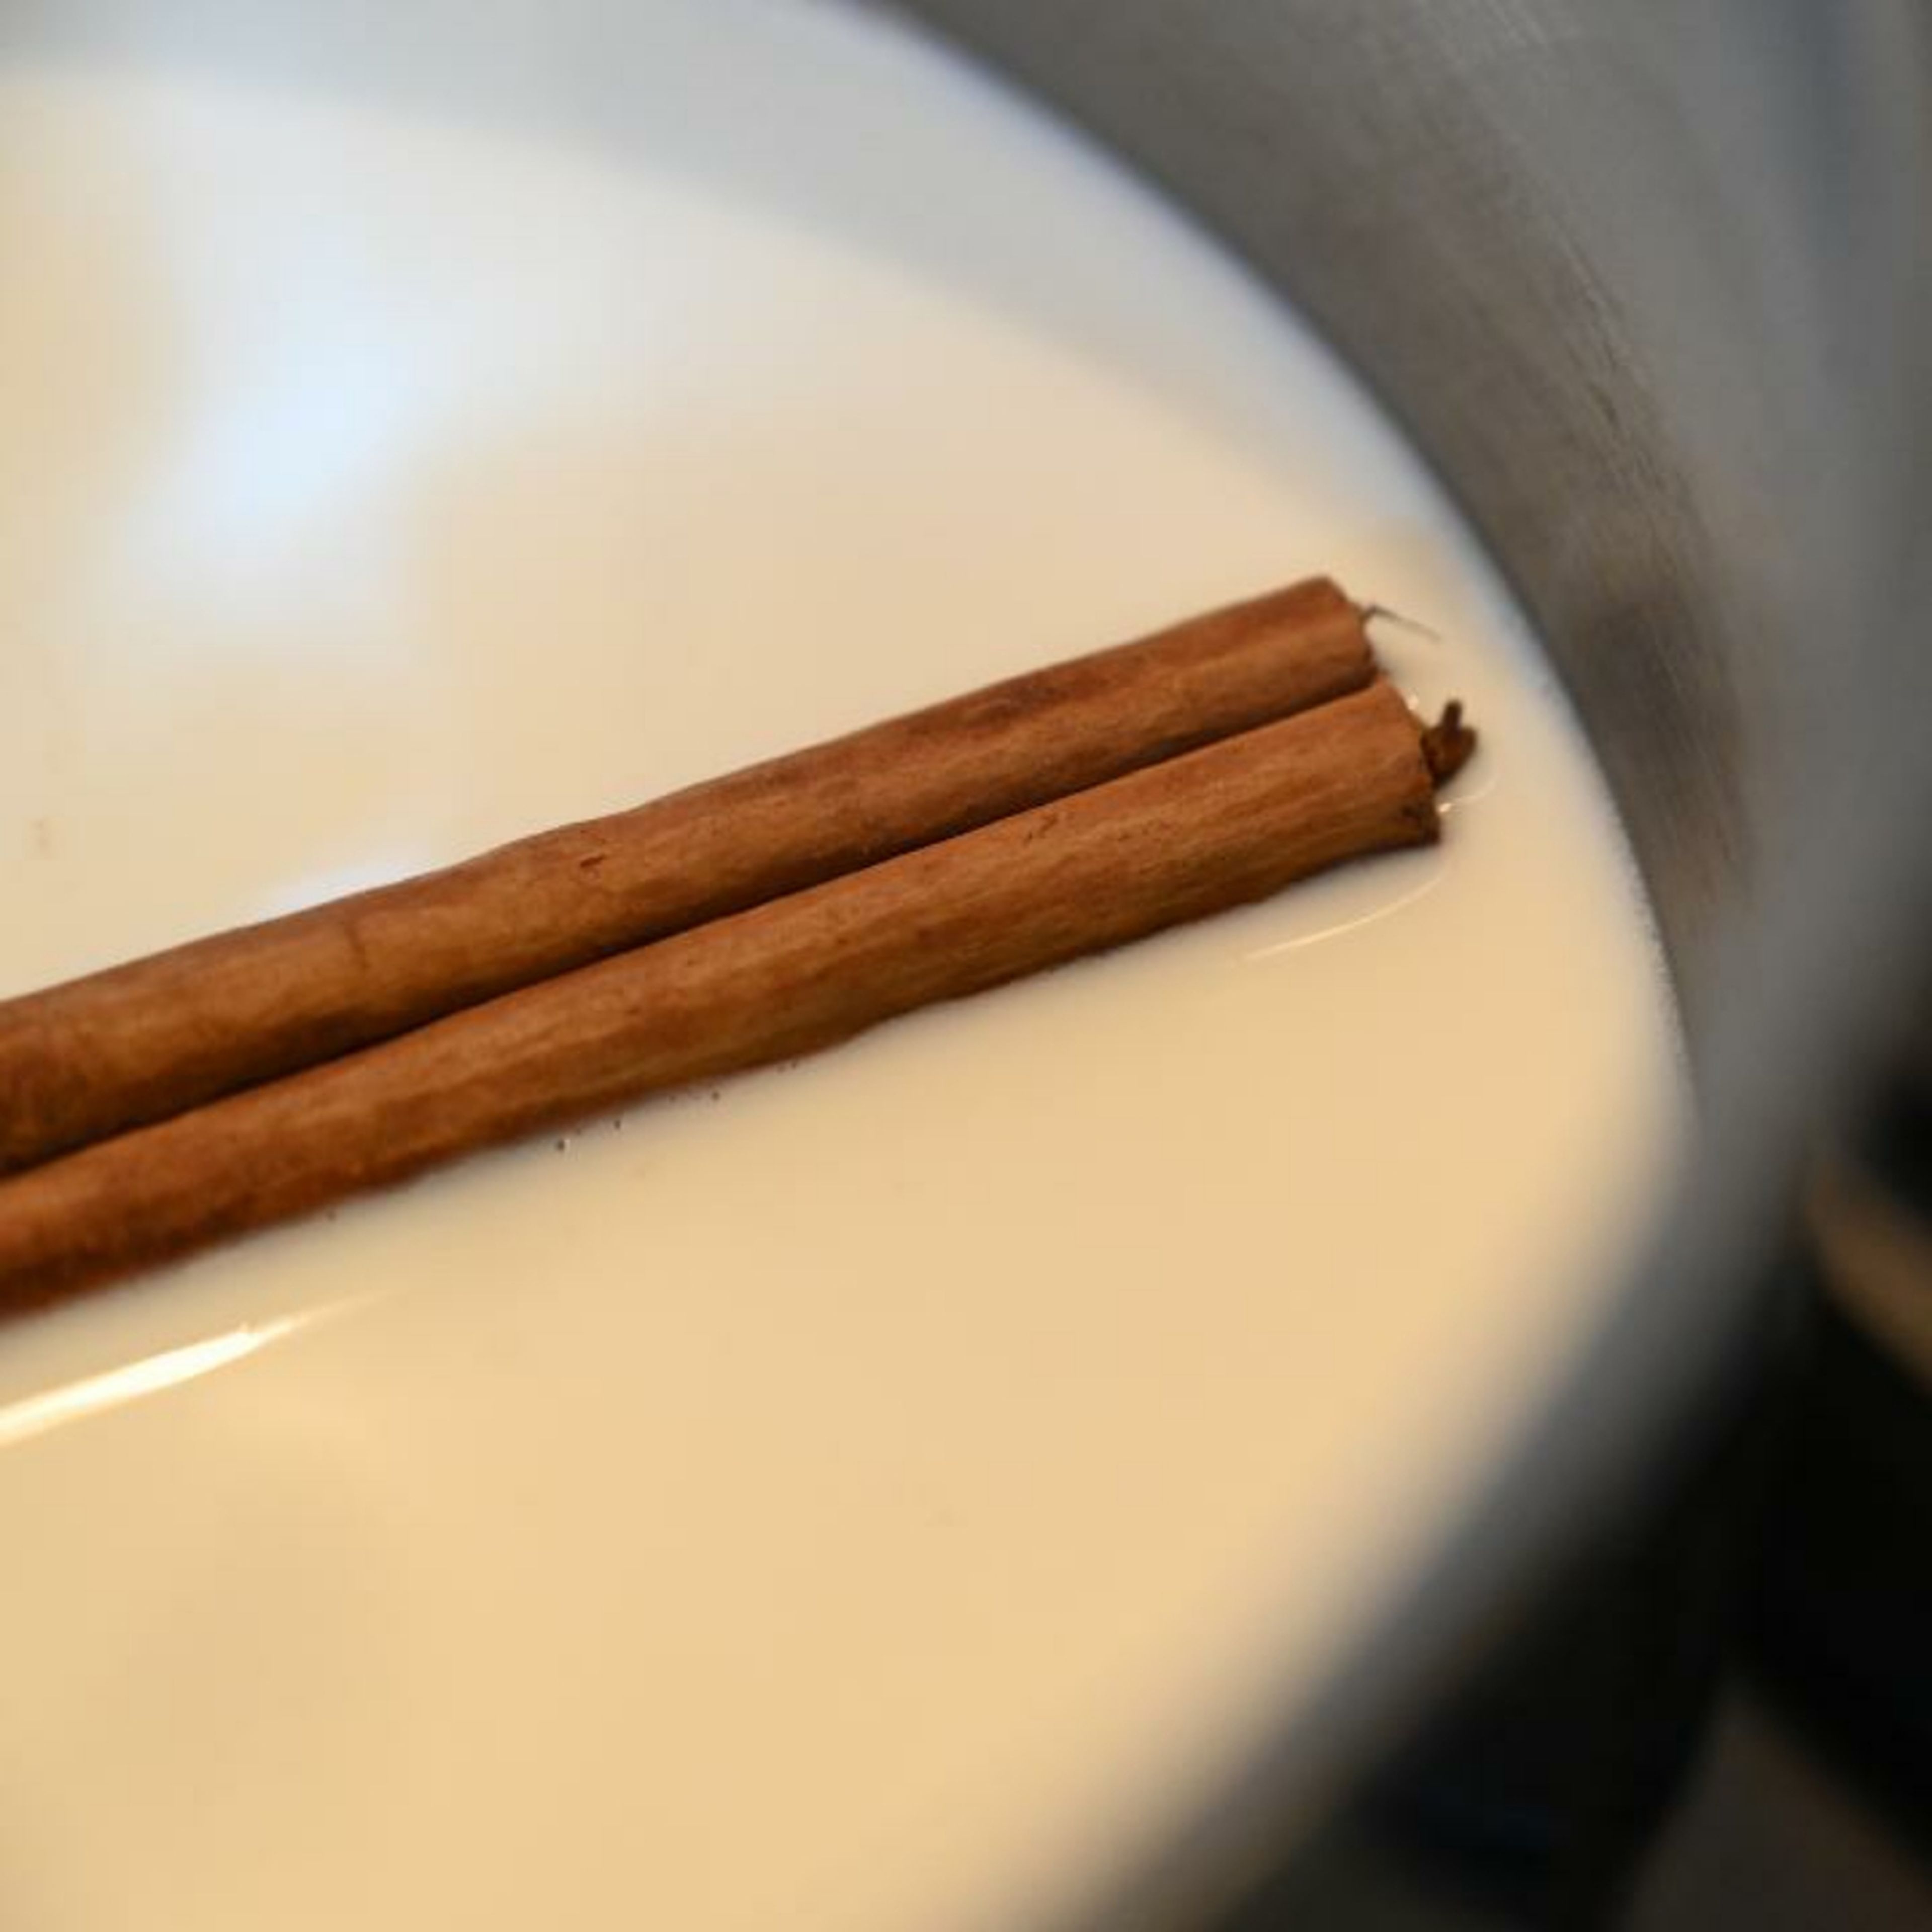 Place the cinnamon stick and milk in a pan and bring to boil. Turn off the heat and leave to infuse for 5 minutes.